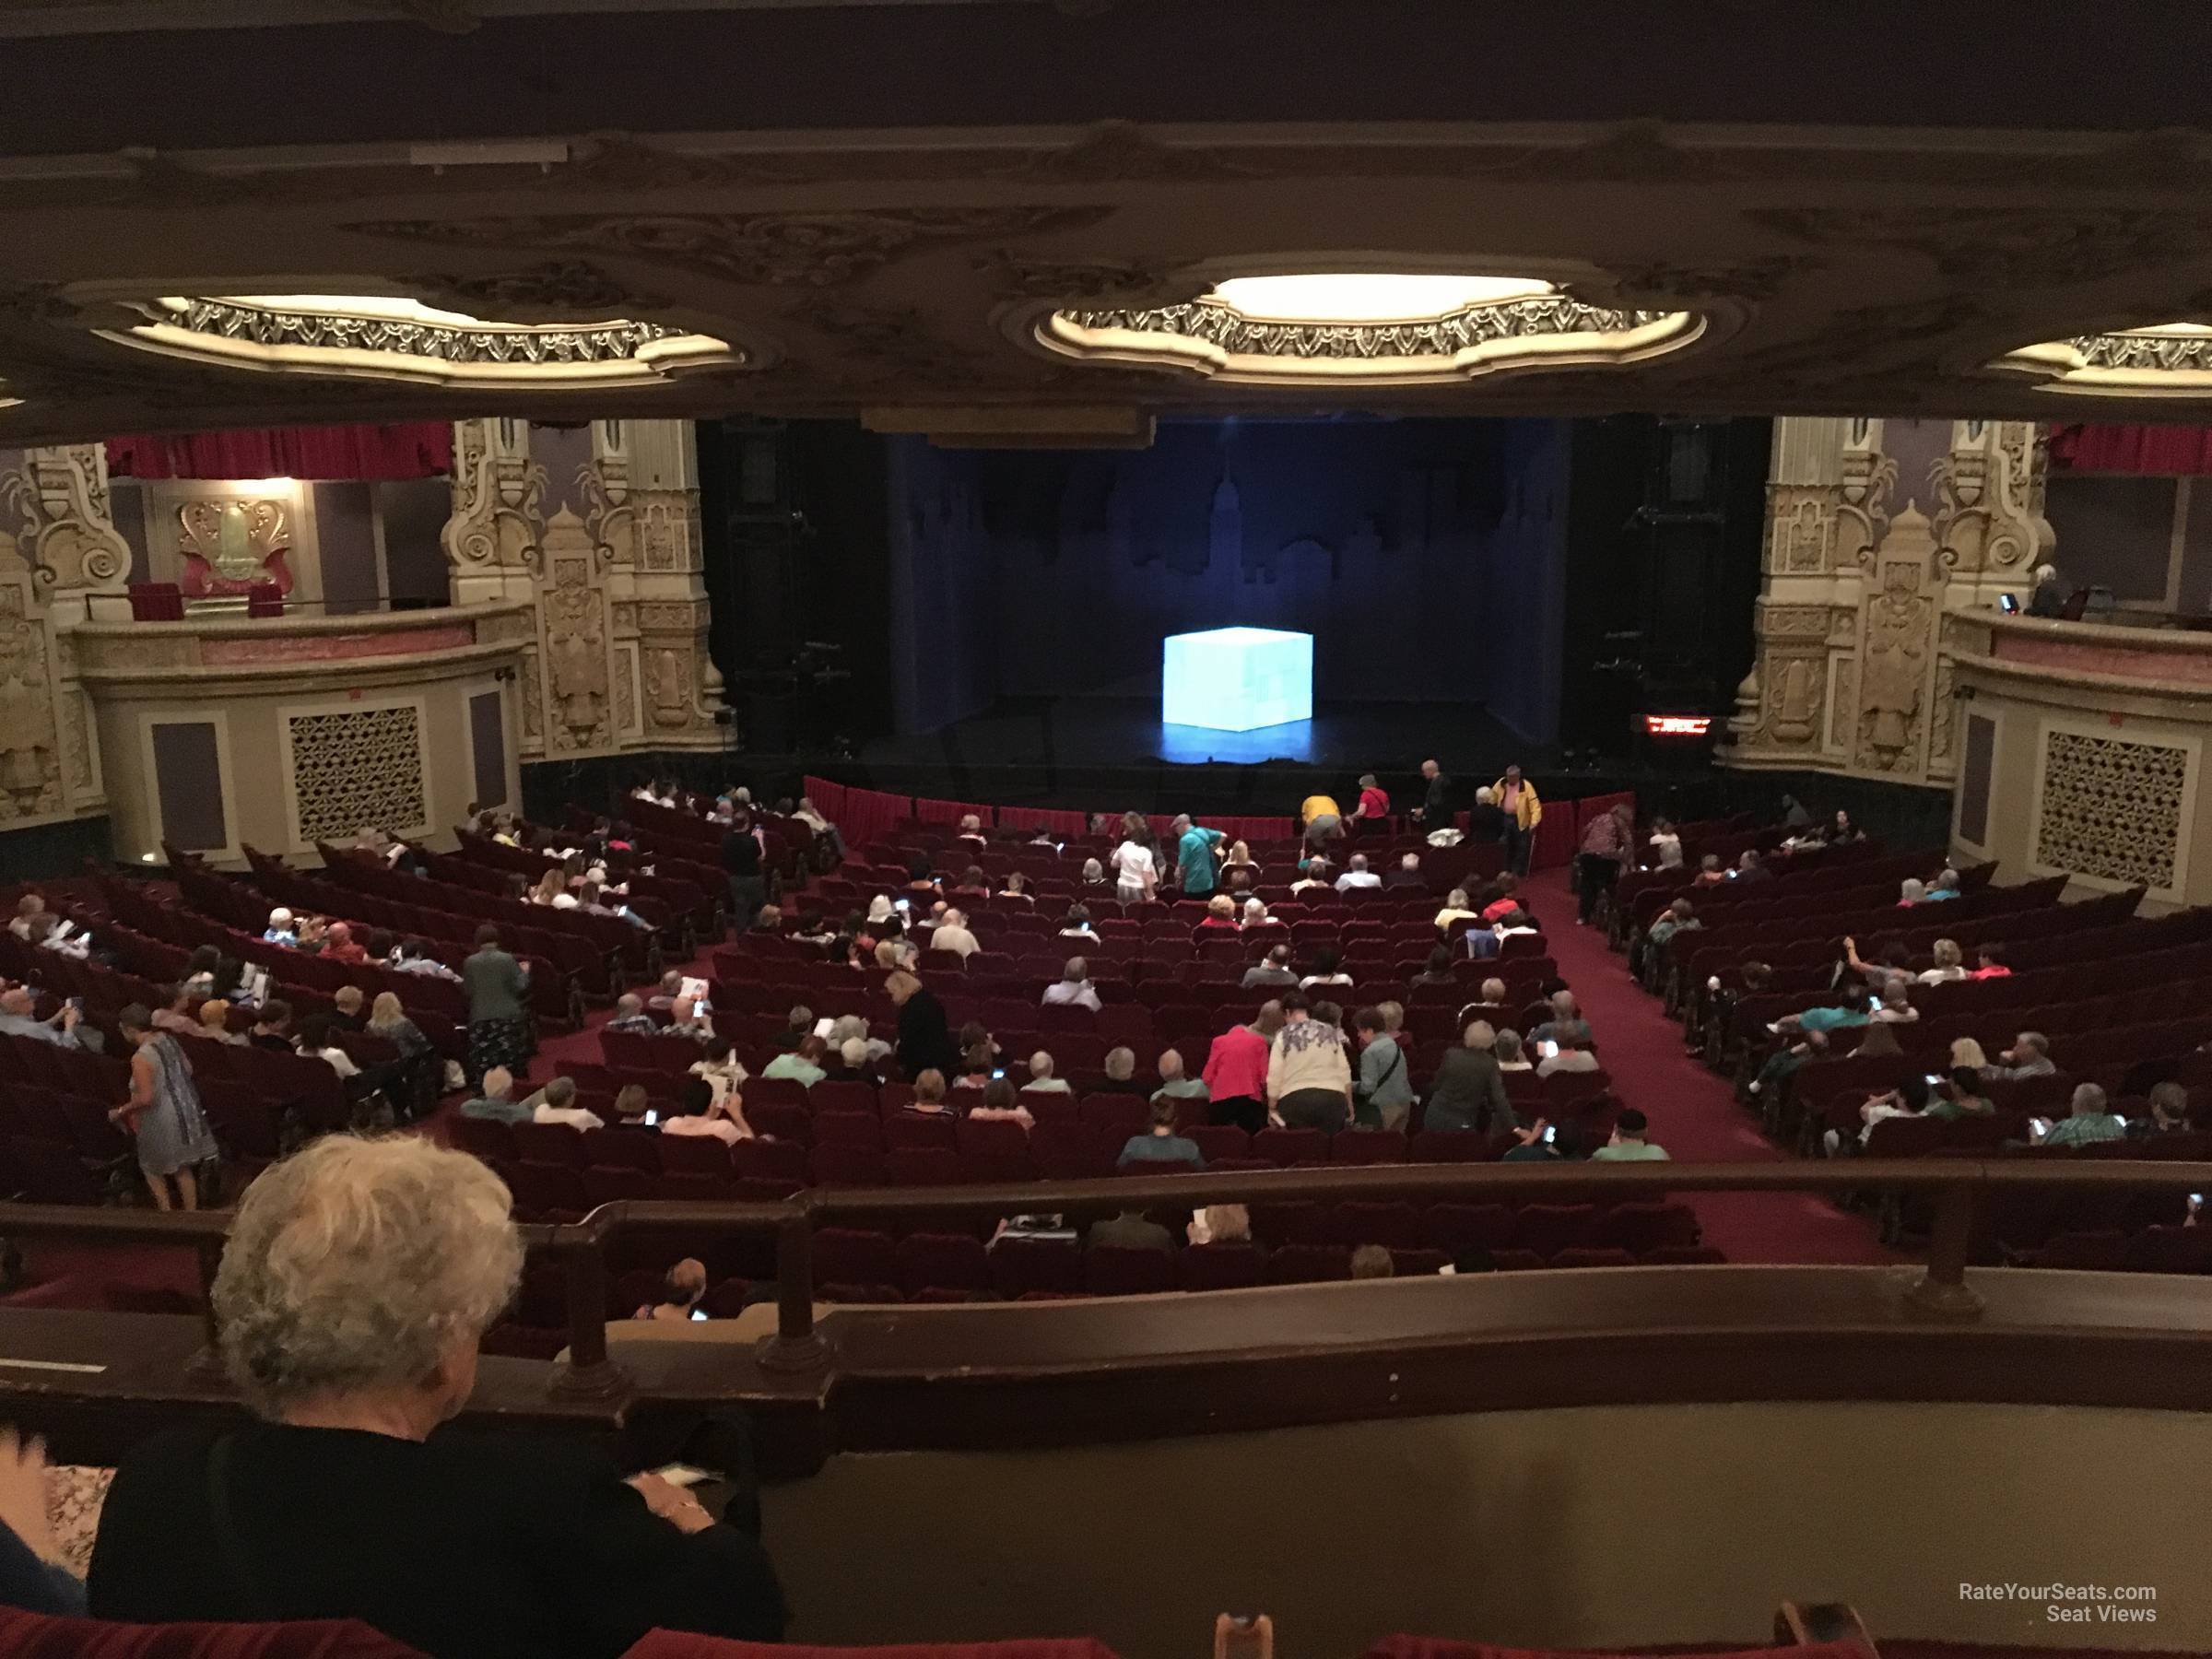 Dress Circle Right at Nederlander Theatre - RateYourSeats.com